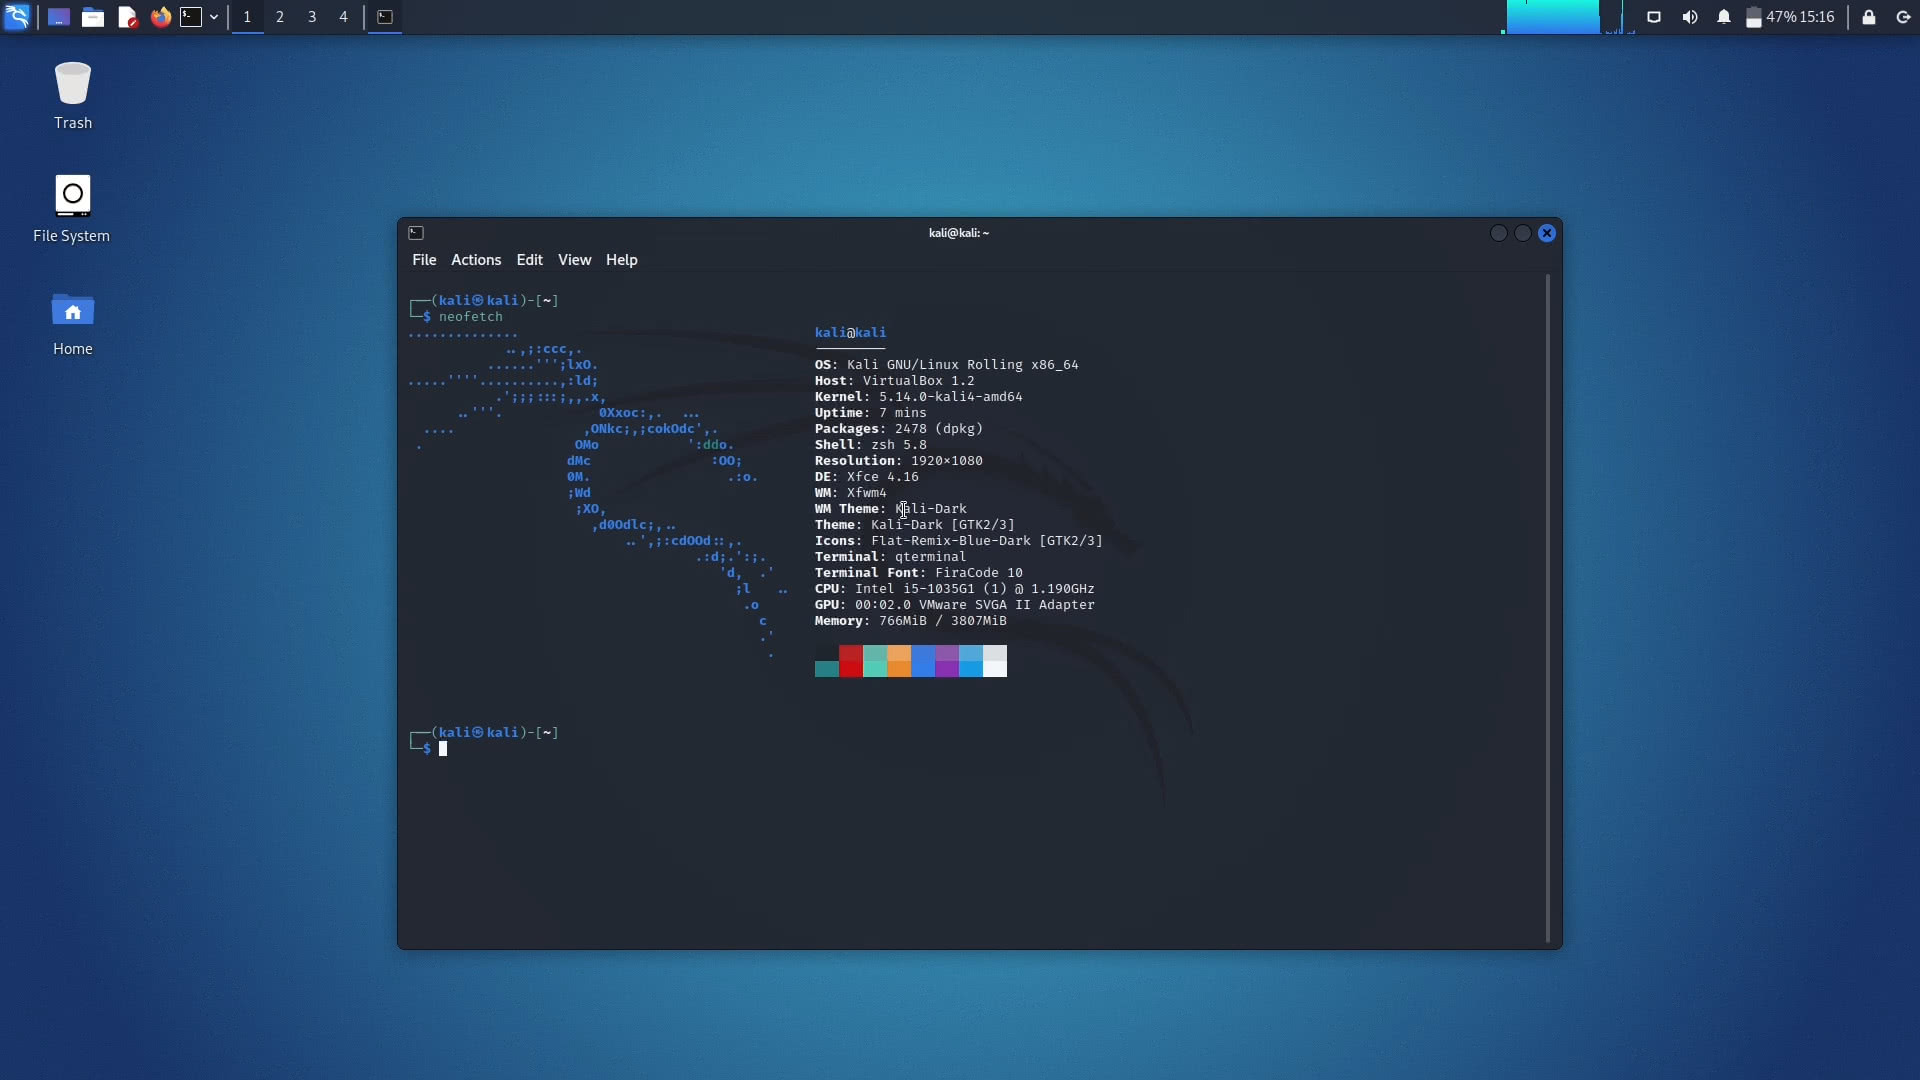 Kali Linux 2021.4 featured image